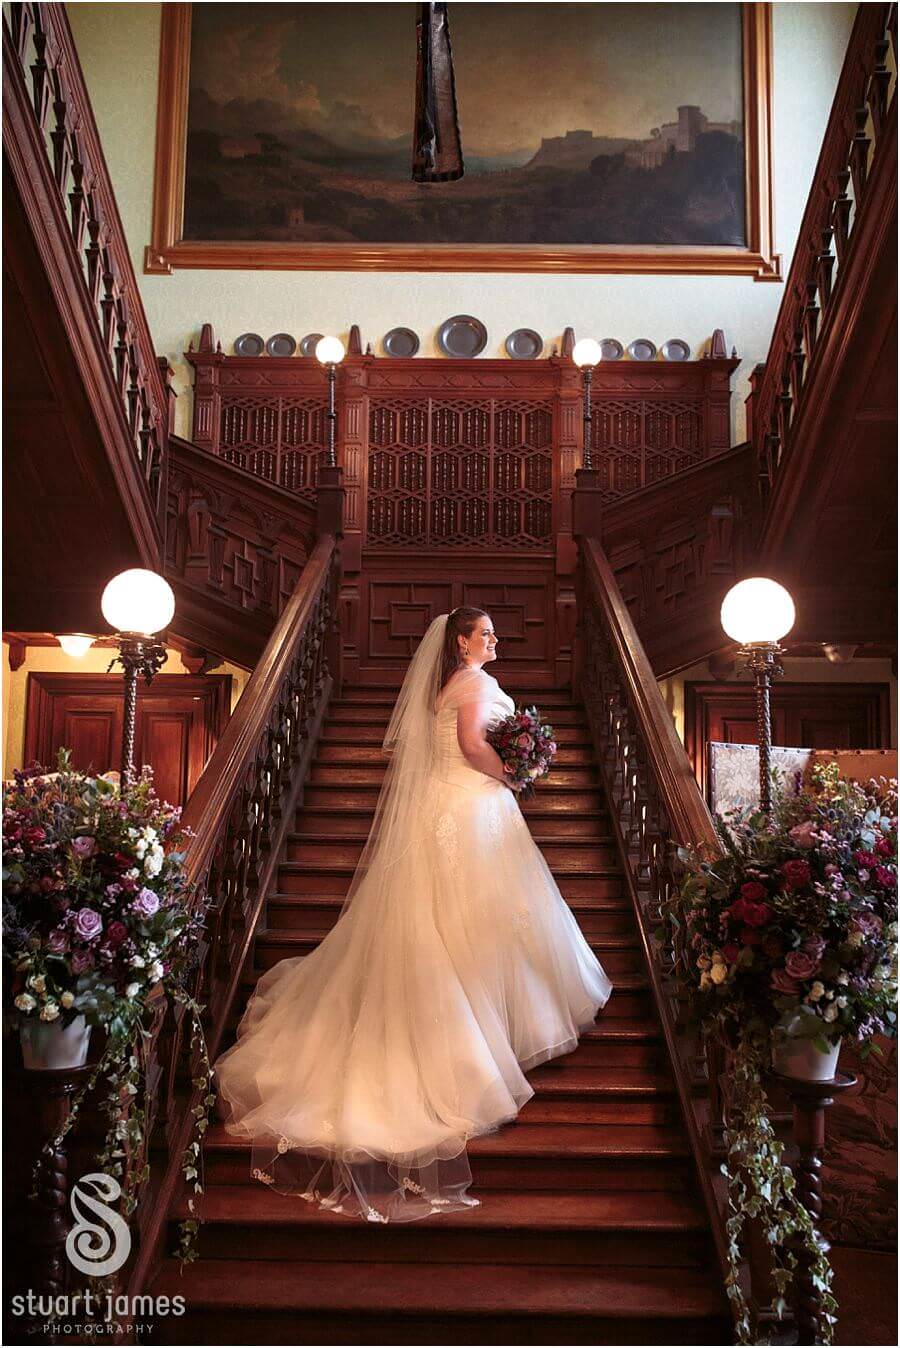 Creative traditional portraits using the grand staircase at Sandon Hall in Stafford by Stafford Wedding Photographer Stuart James